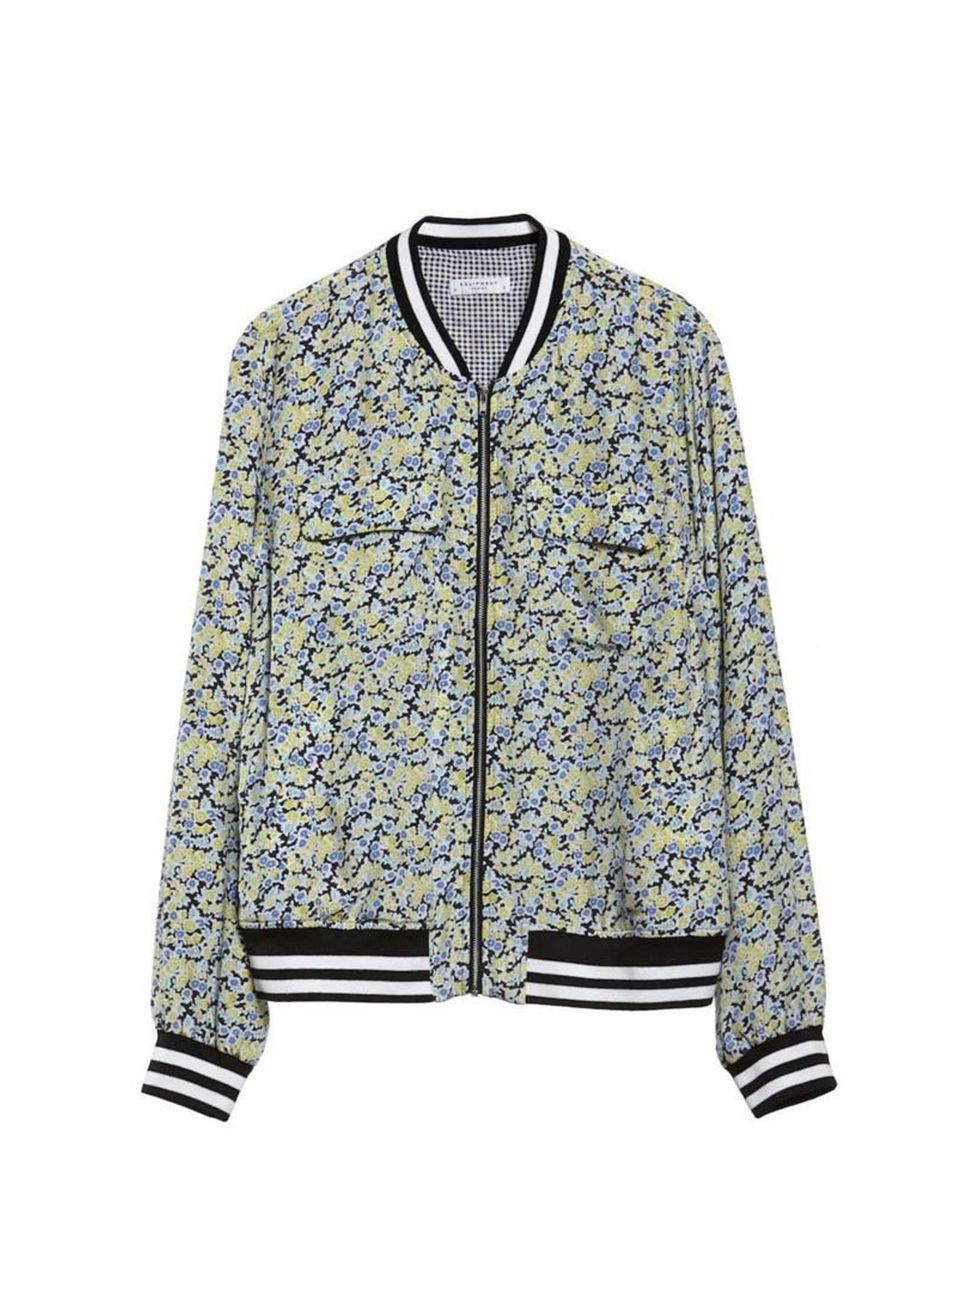 <p>Layer over a black cotton dress, or pair with rolled-up boyfriend jeans.</p><p>Equipment jacket, £375 at <a href="http://www.trilogystores.co.uk/equipment/abott-bomber-floral-blue-multi.aspx">Trilogy</a></p>